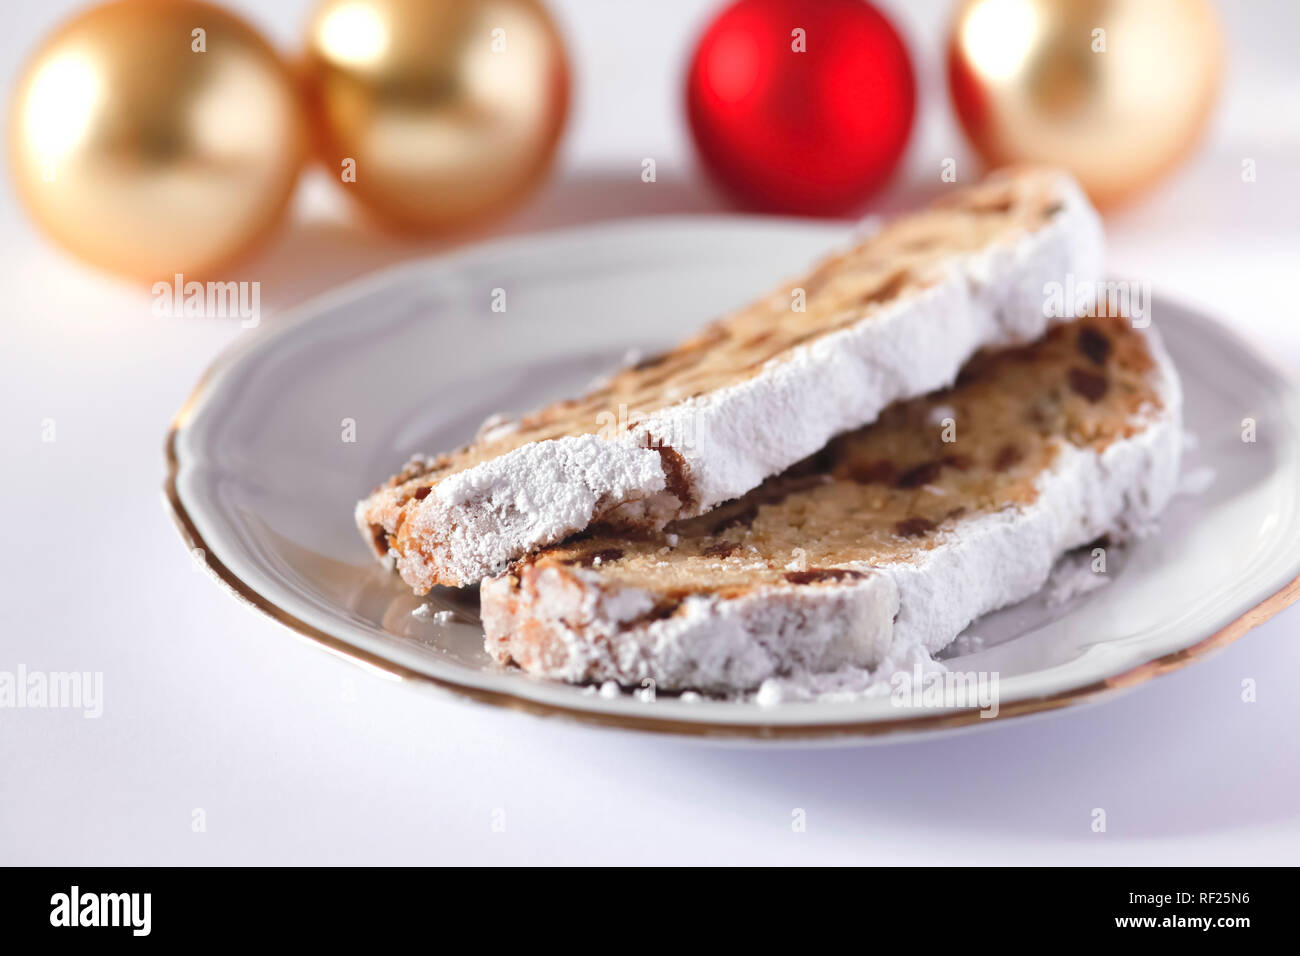 Slices of German Christmas stollen on a plate Stock Photo